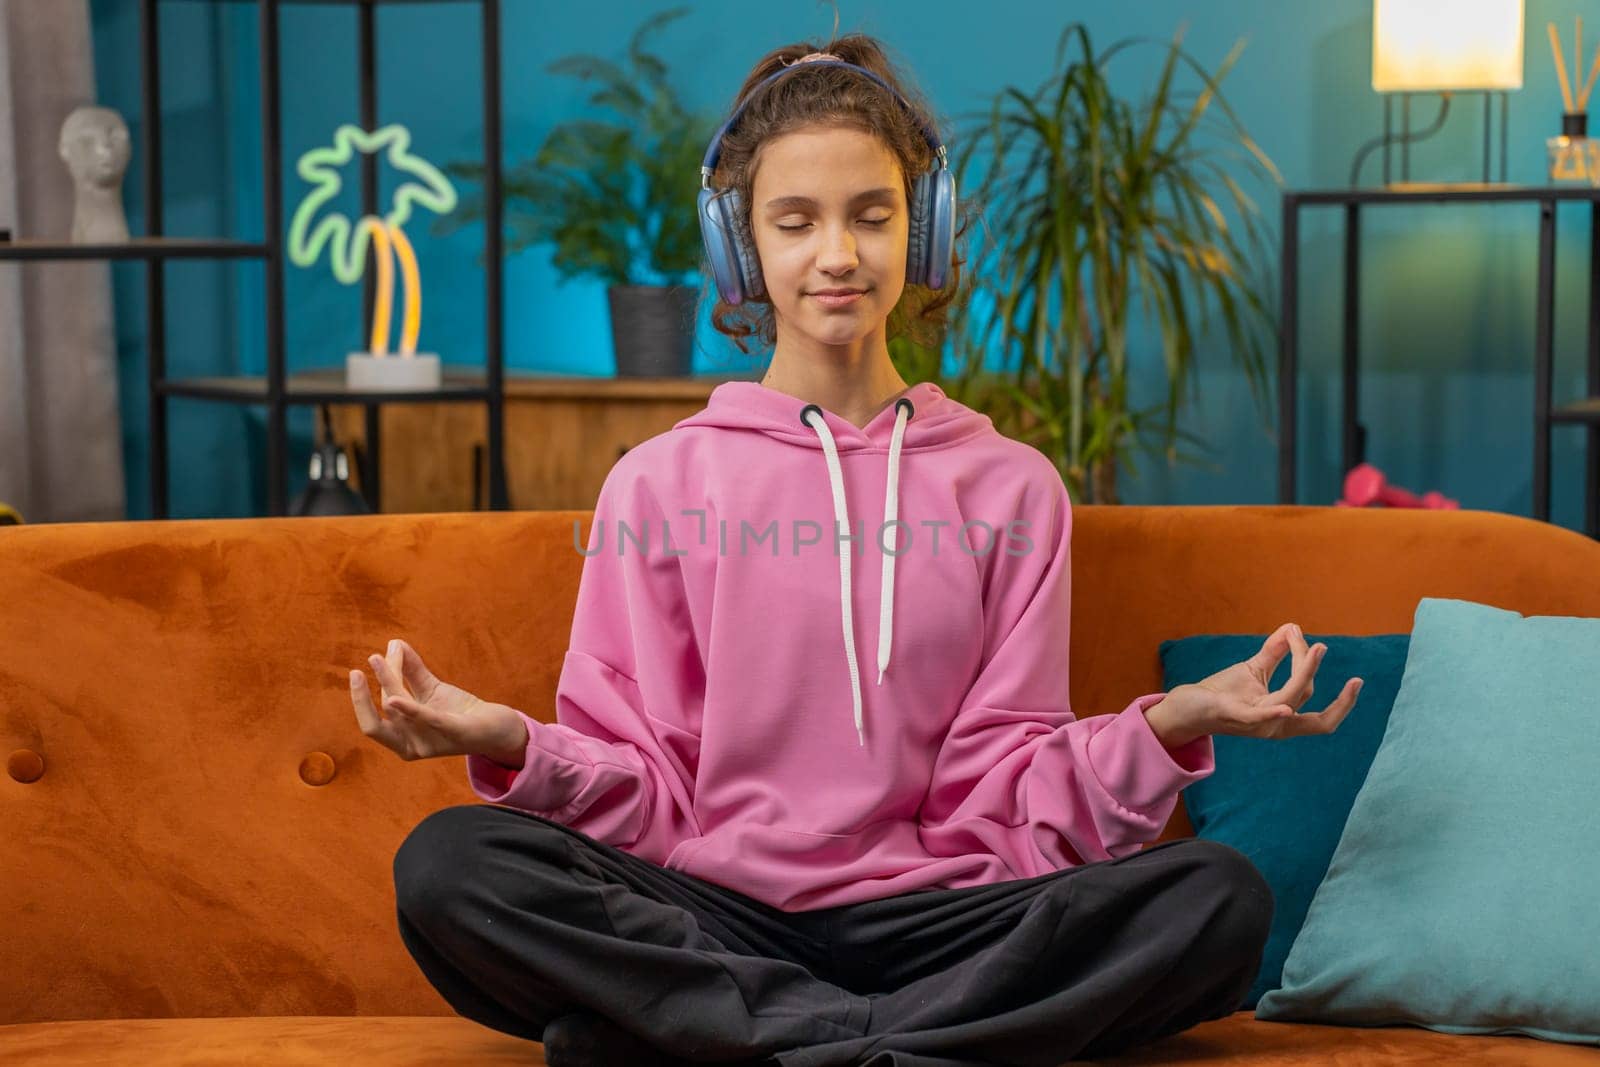 Keep calm down, relax. Preteen school girl breathes deeply with mudra gesture, eyes closed meditating with concentrated thoughts, peaceful mind. Young child kid at home room apartment sitting on couch